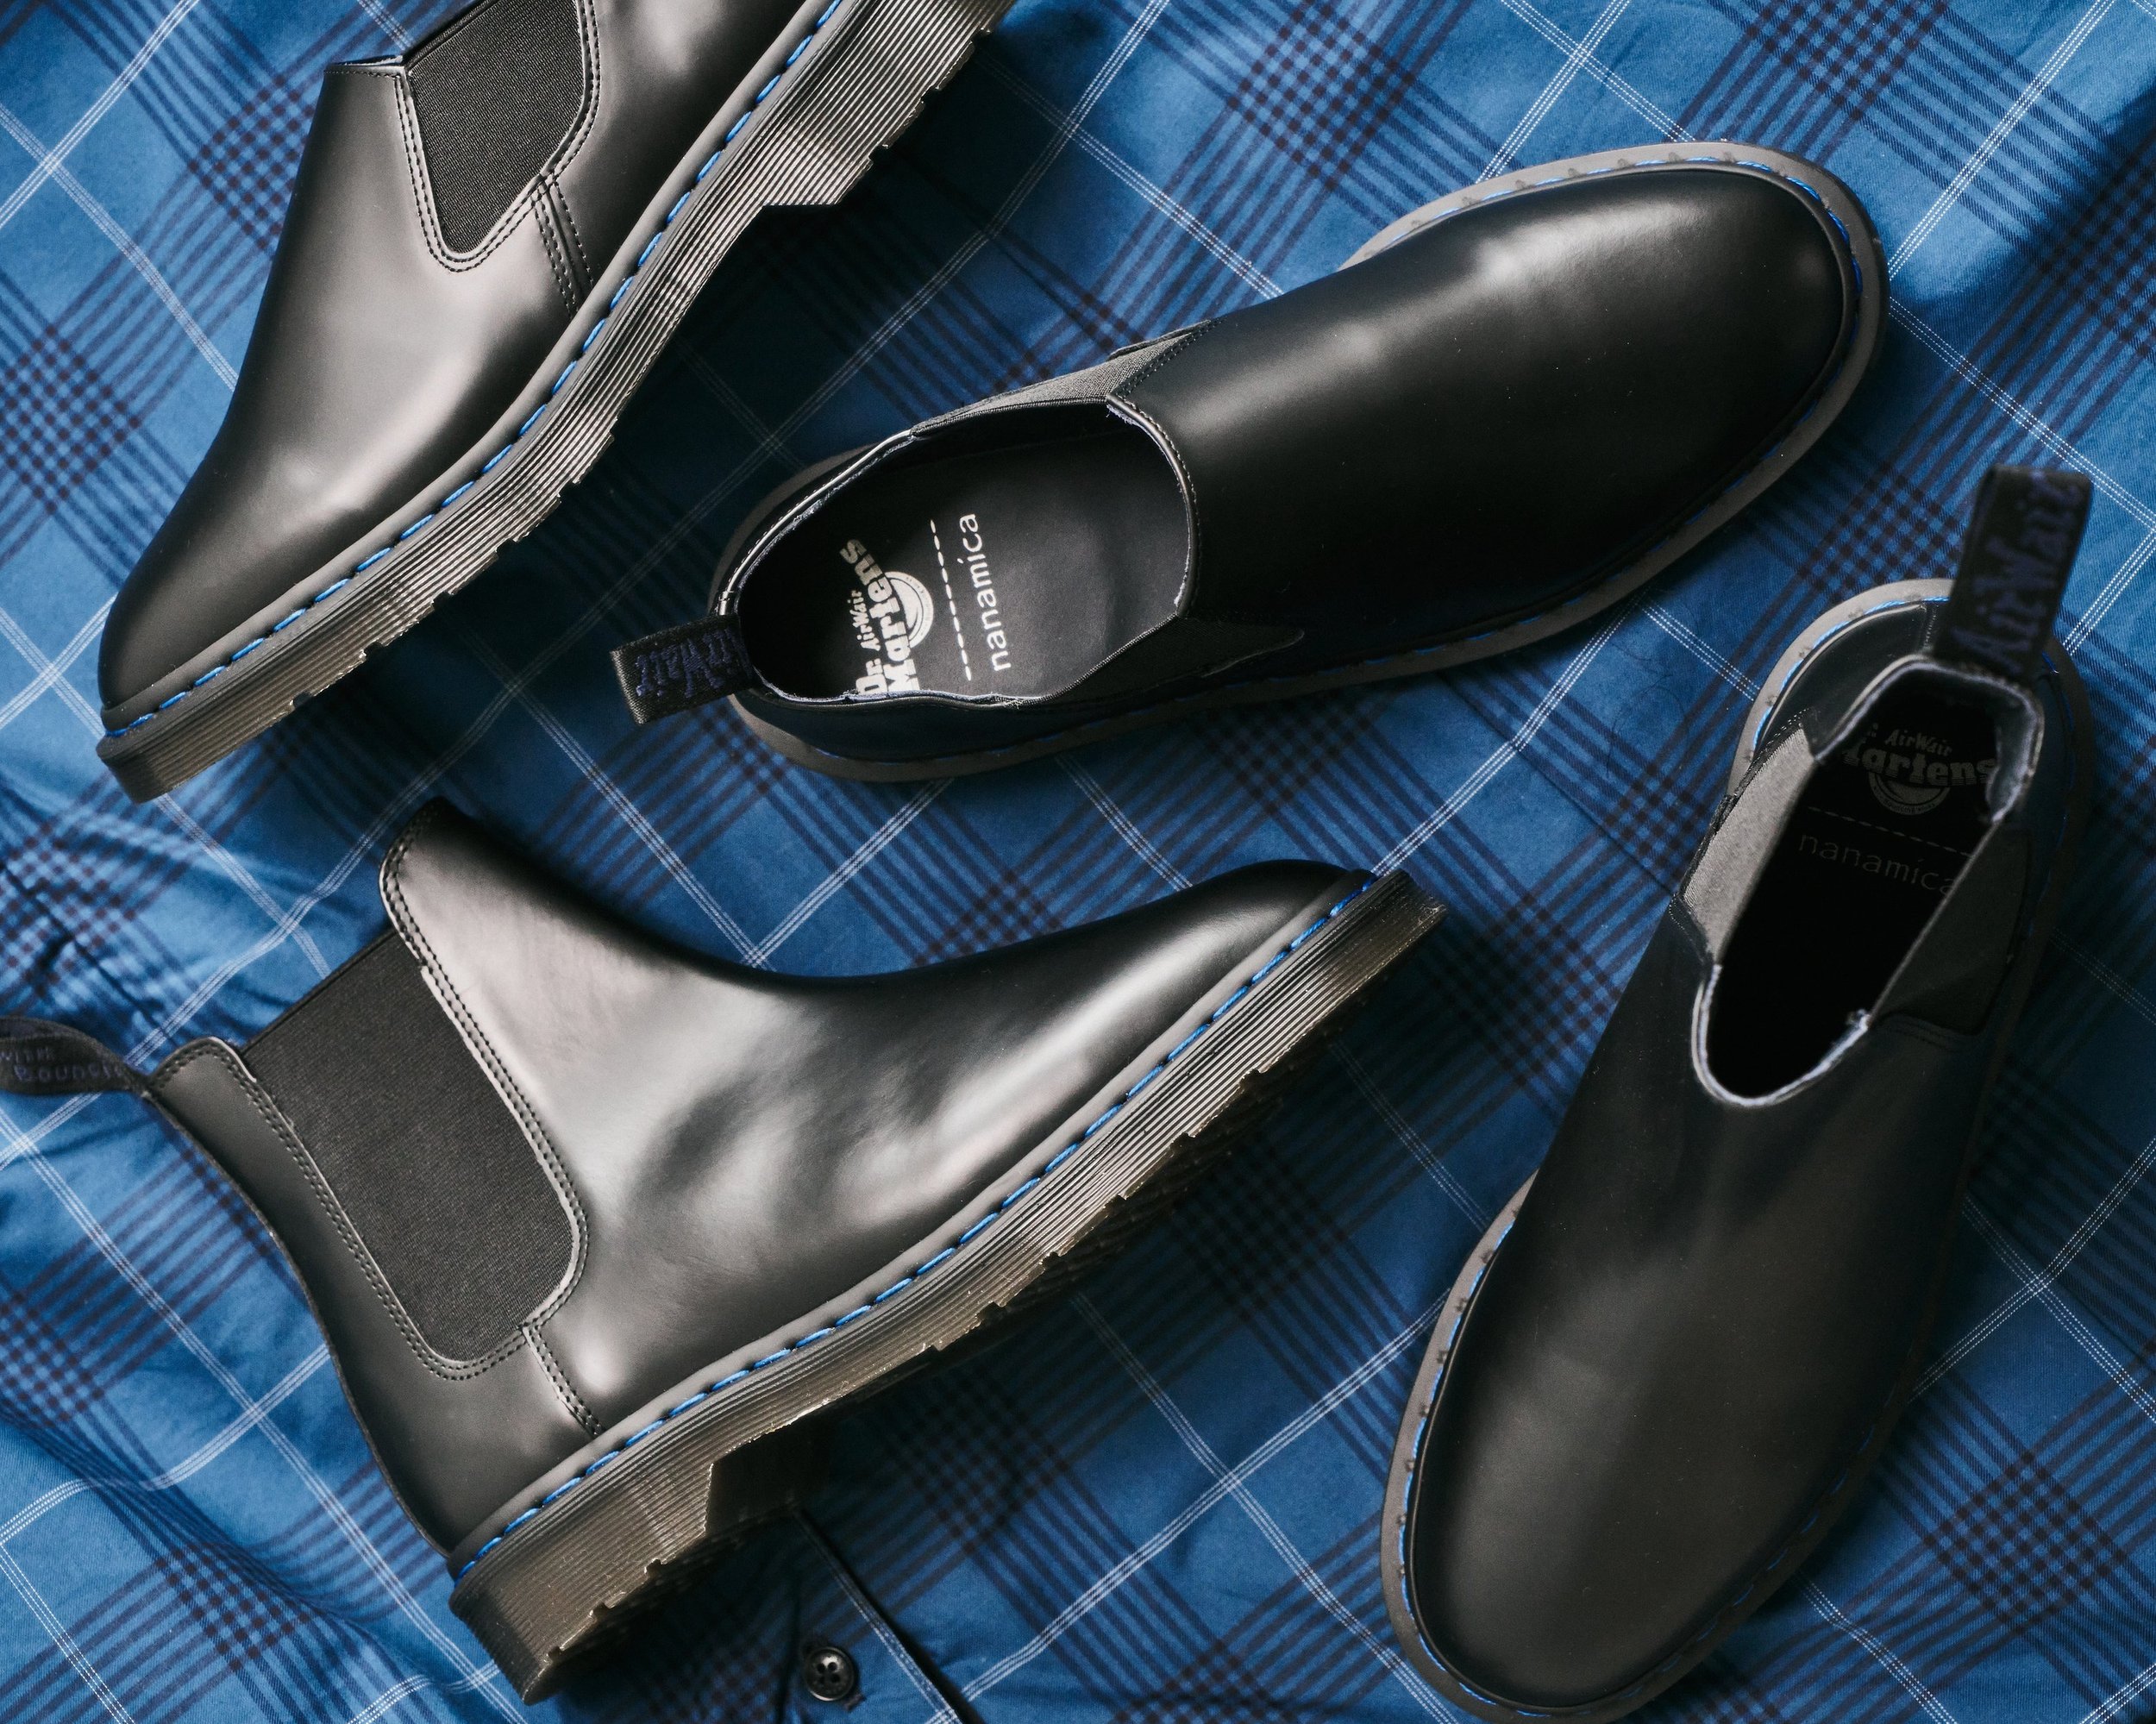 nanamica and Dr. Martens Merges Classic Style and Functionality on the  'Graeme' and 'Louis' Slip-On Boots — eye_C